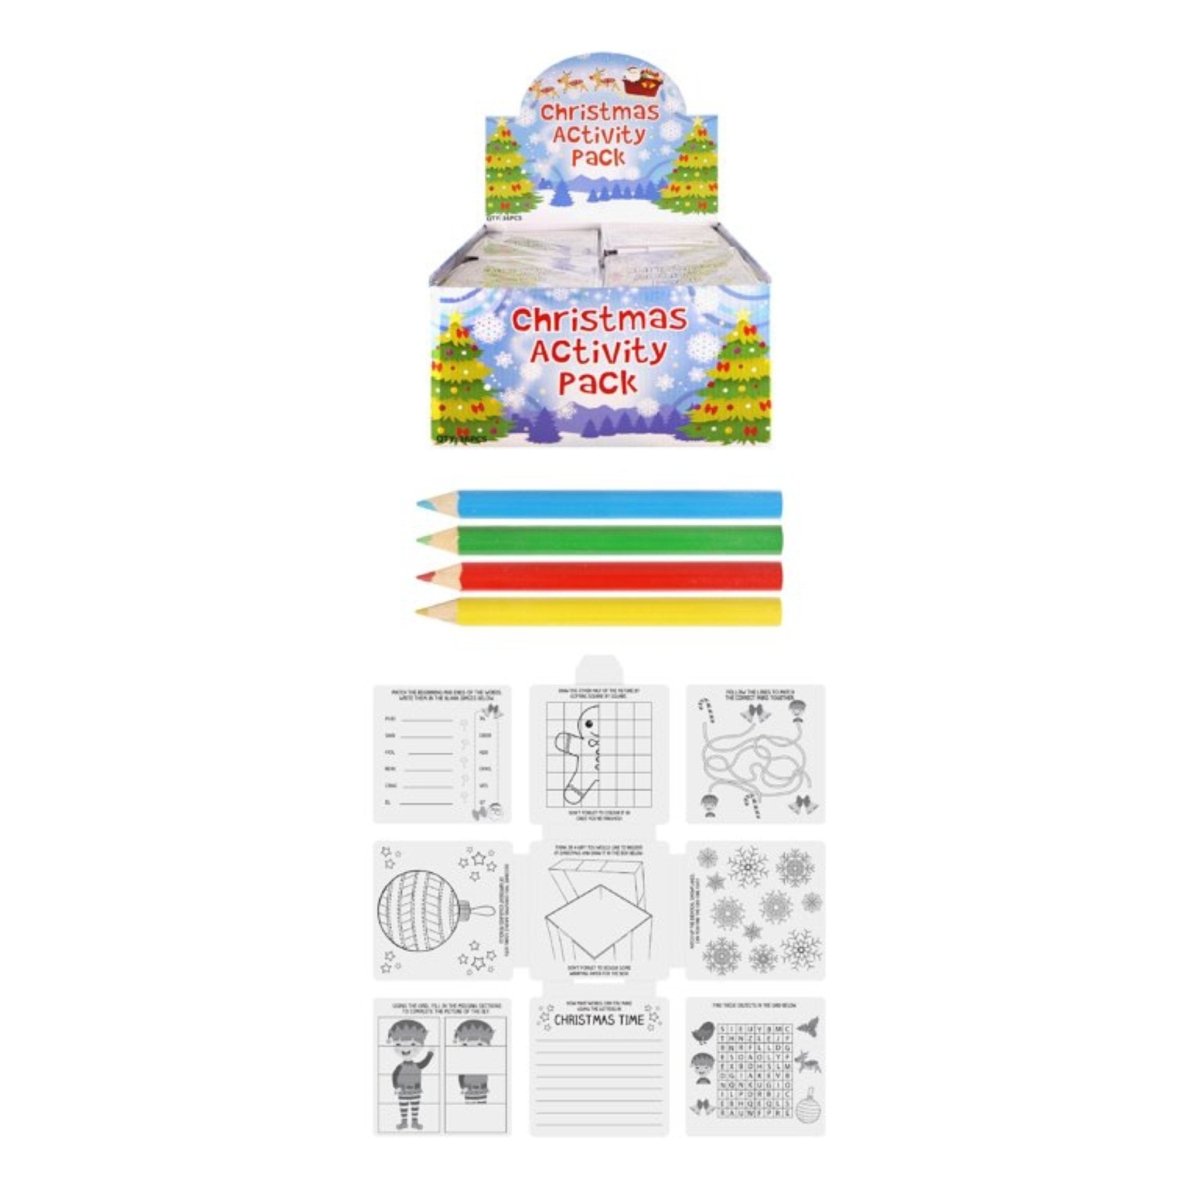 Children's Christmas Activity Pack - Kids Party Craft